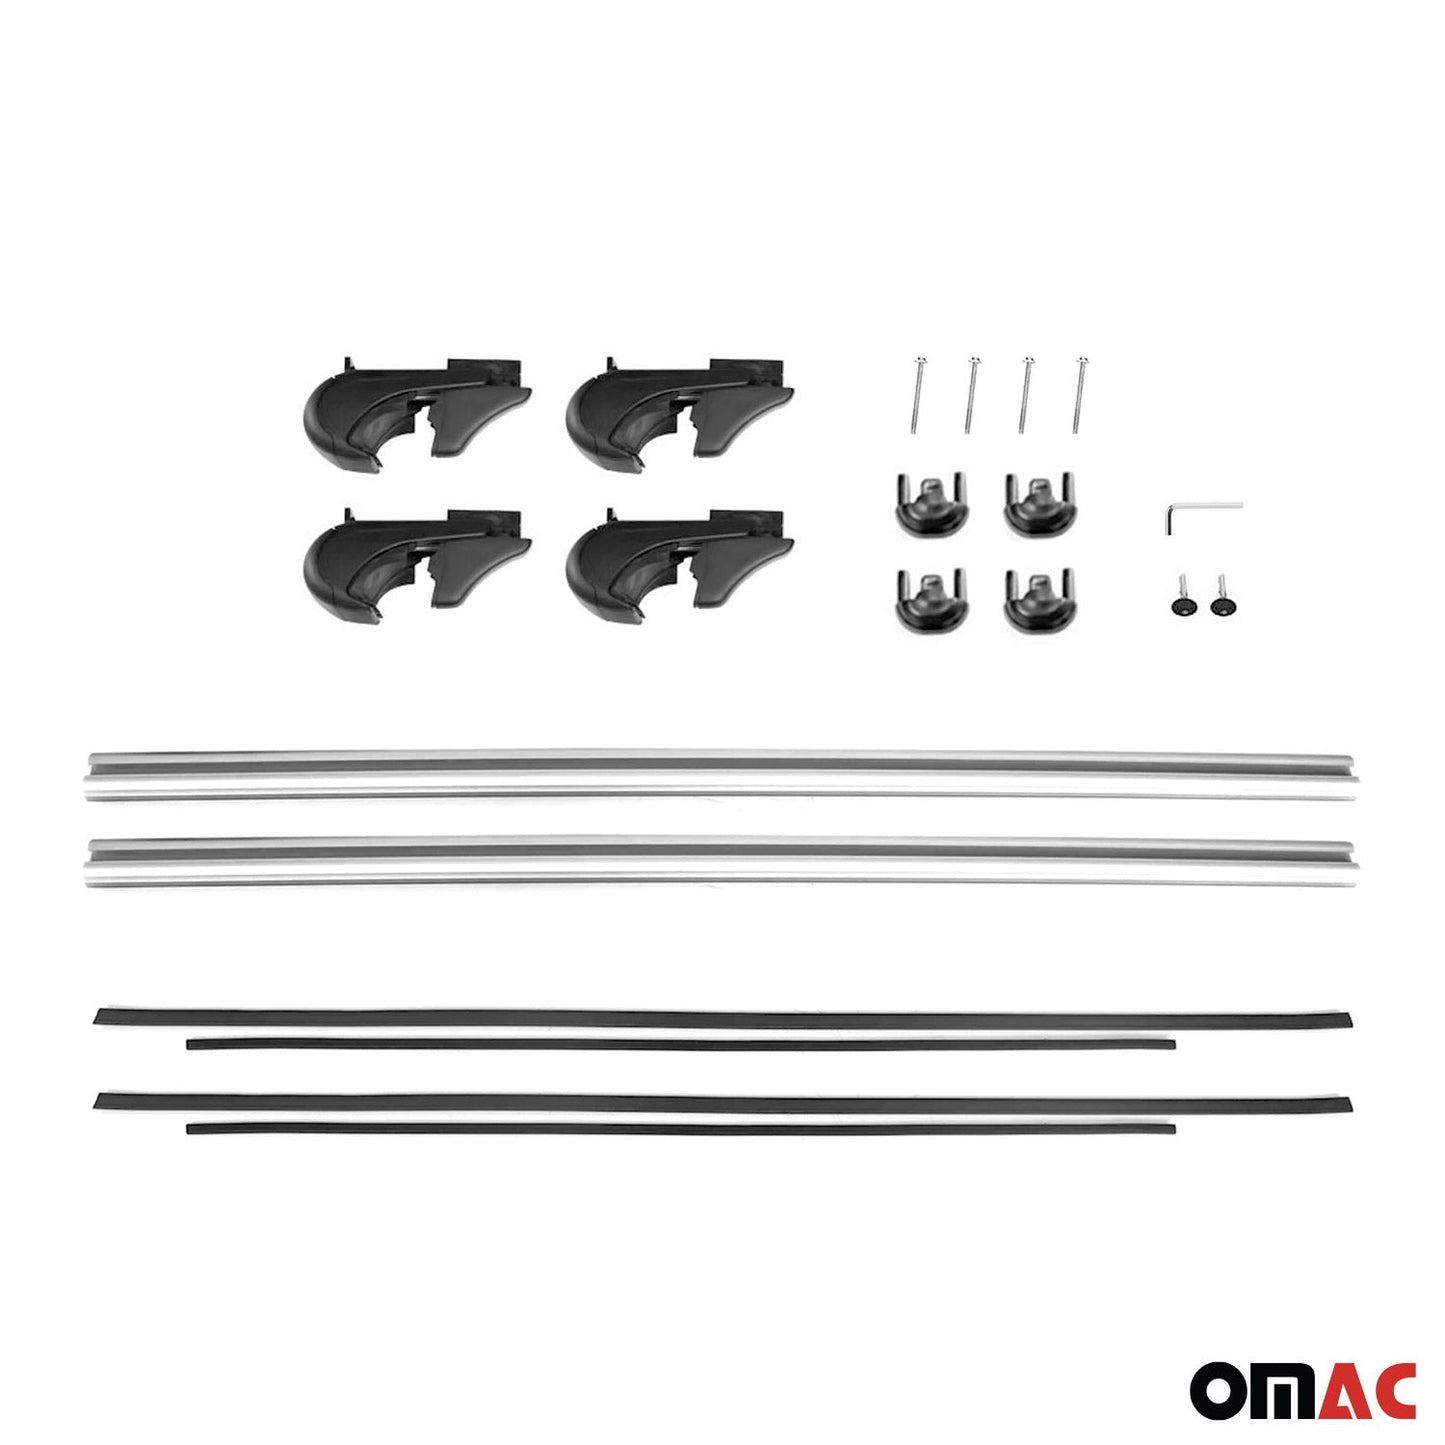 OMAC Lockable Roof Rack Cross Bars Luggage Carrier for Cadillac SRX 2004-2016 Black 21029696929MB